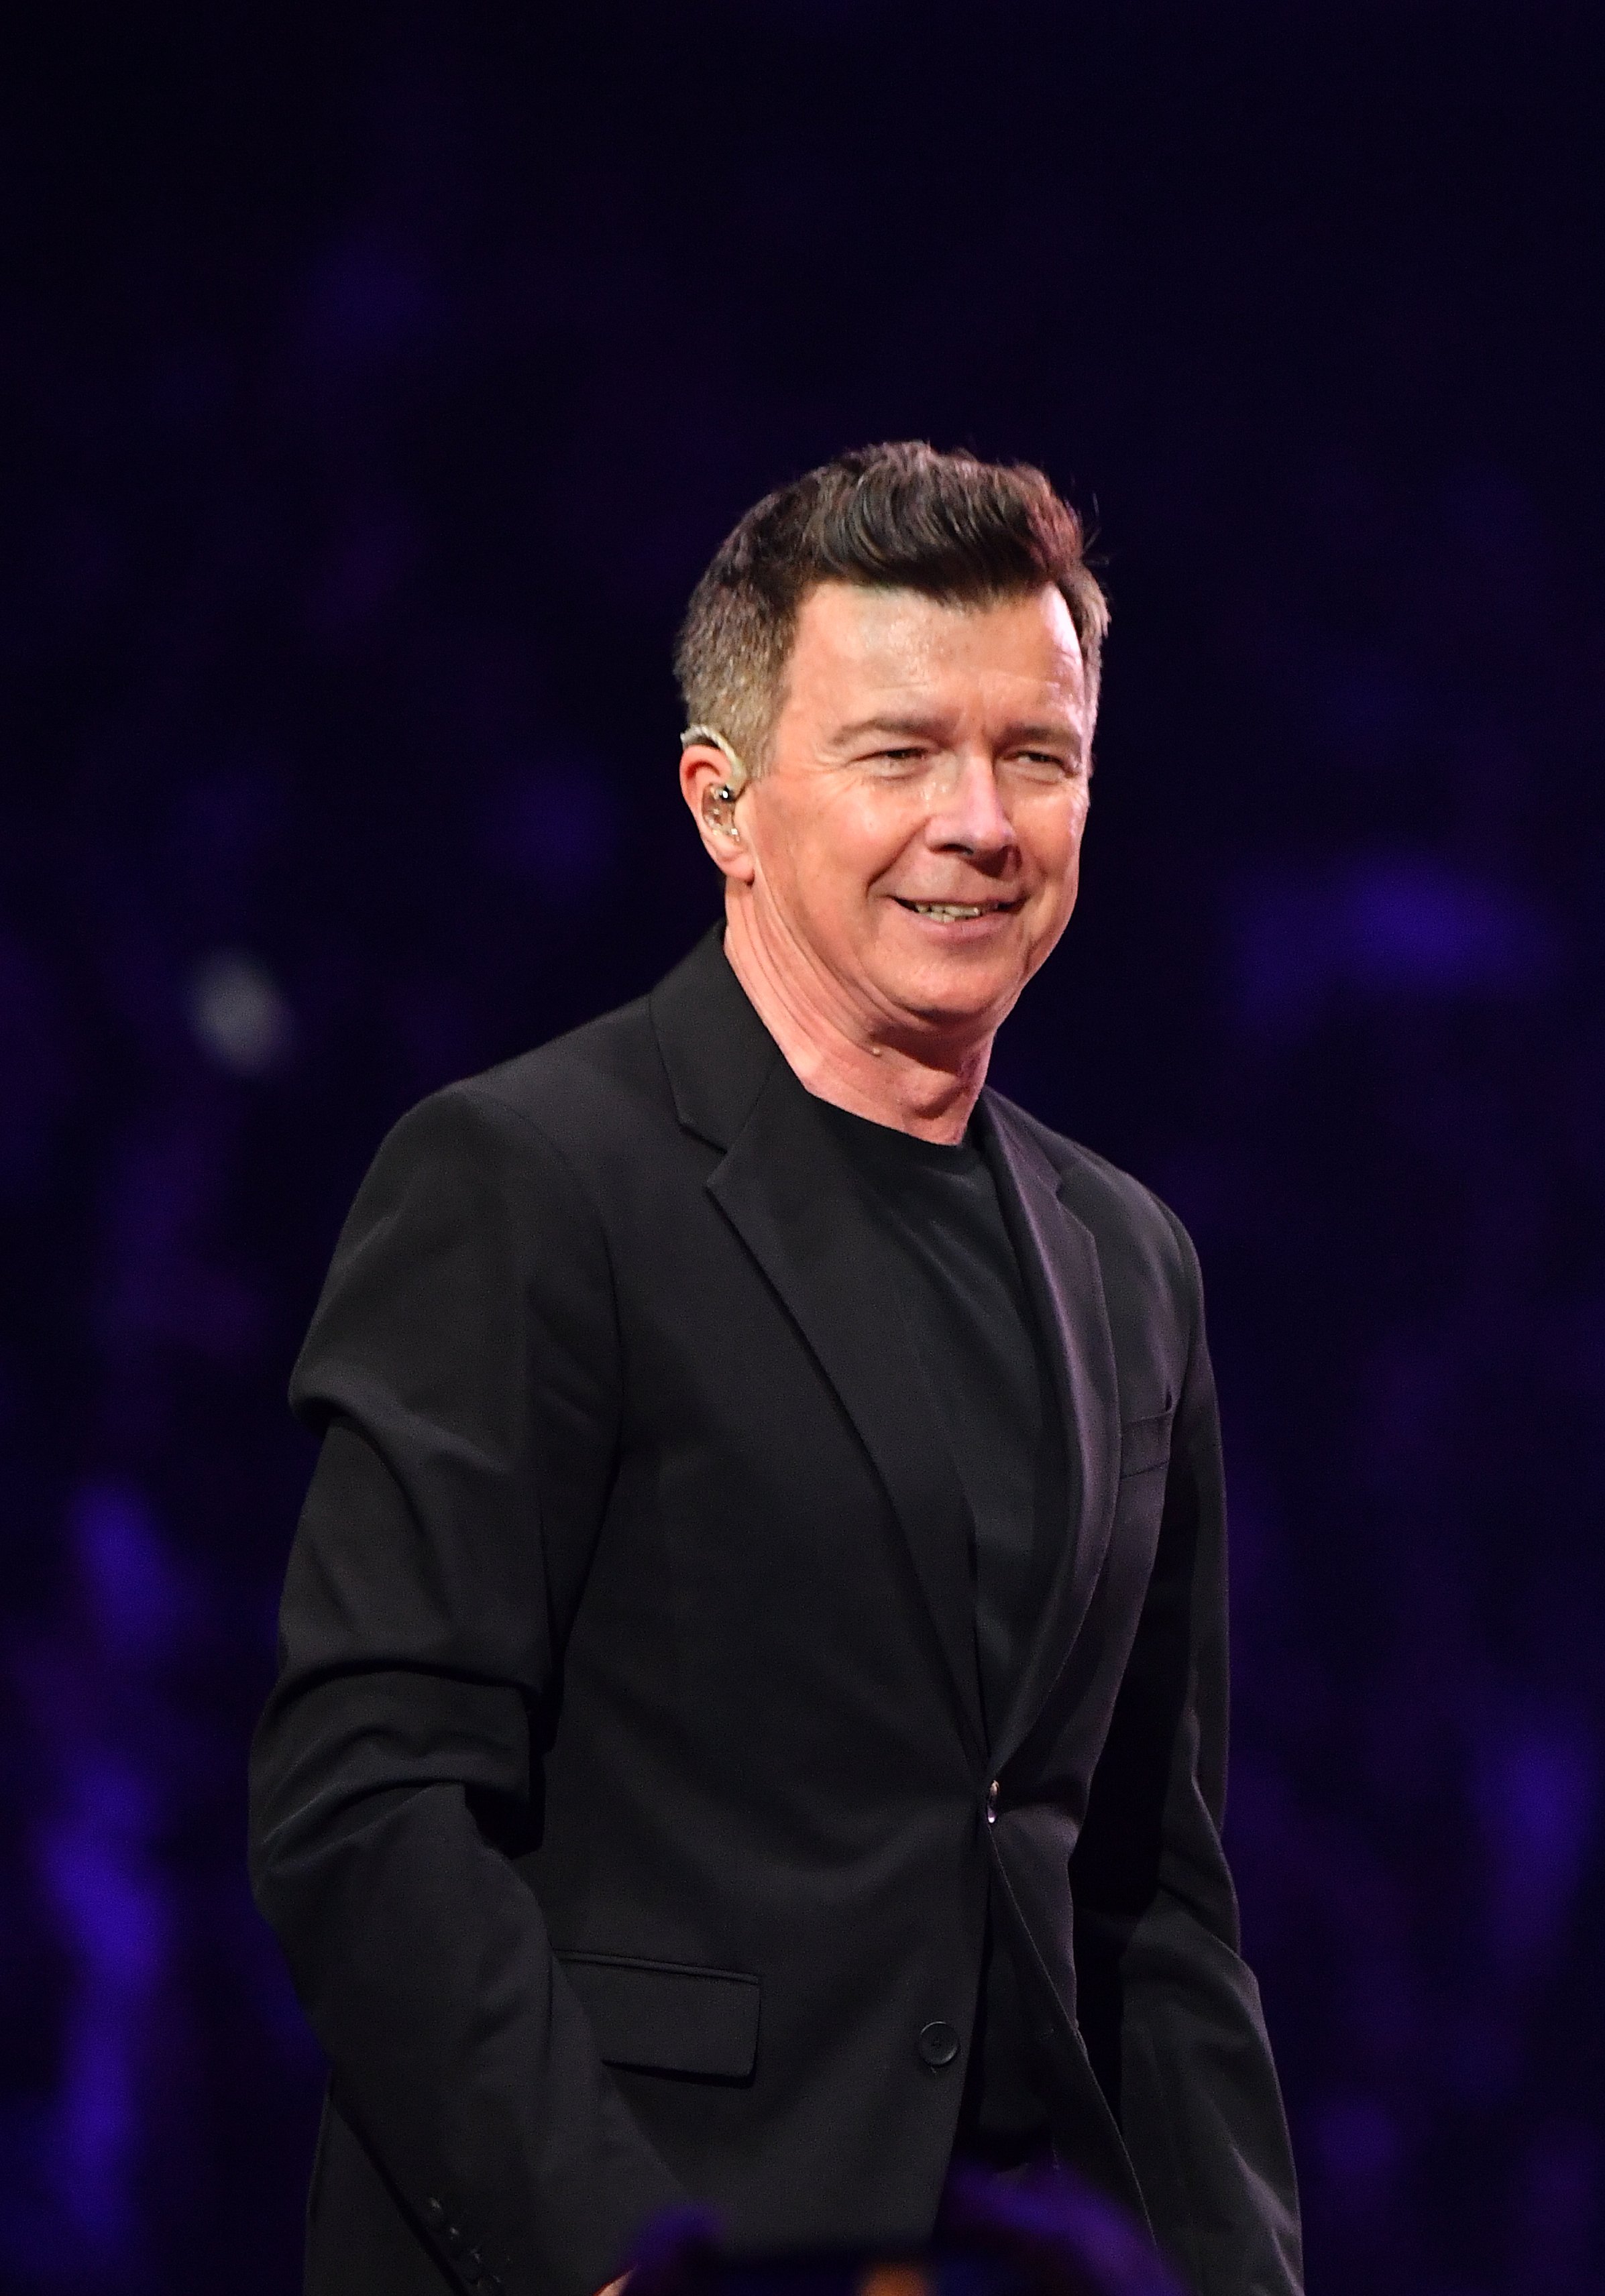 Rick Astley performing during his "The Mixtape" tour on July 07, 2022, in Georgia. | Source: Getty Images